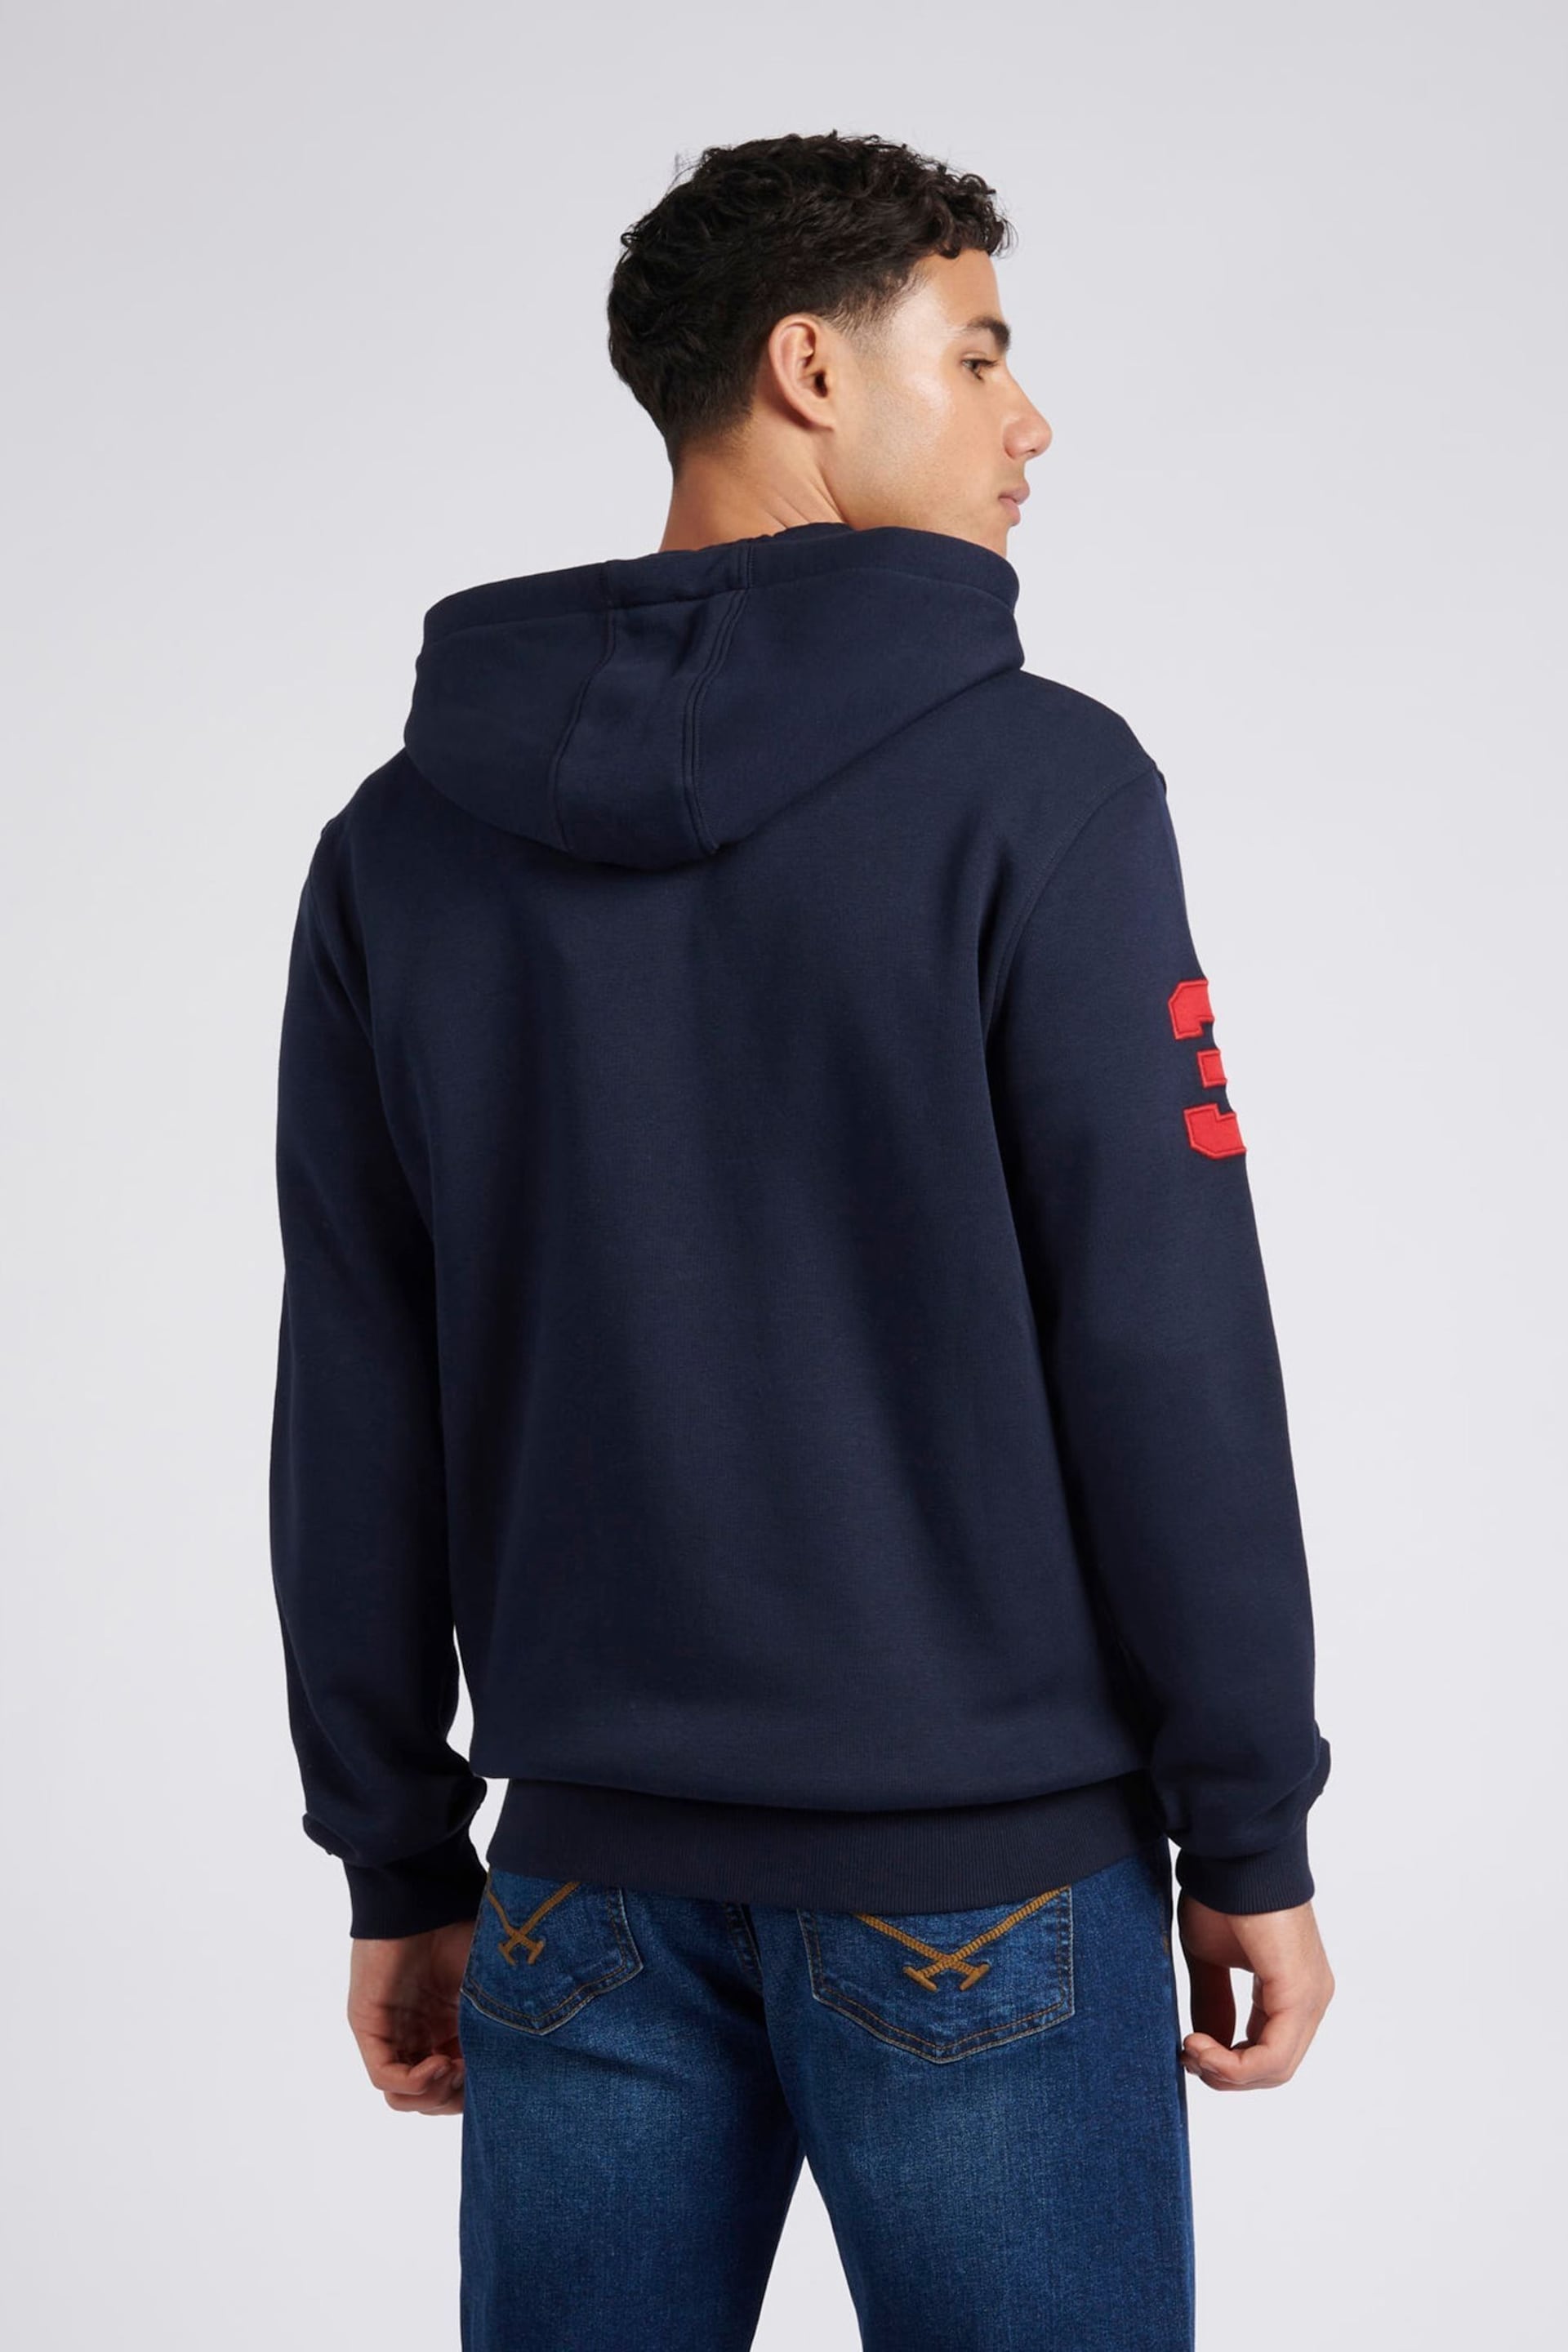 U.S. Polo Assn. Mens Classic Fit Player 3 Zip Hoodie - Image 2 of 9